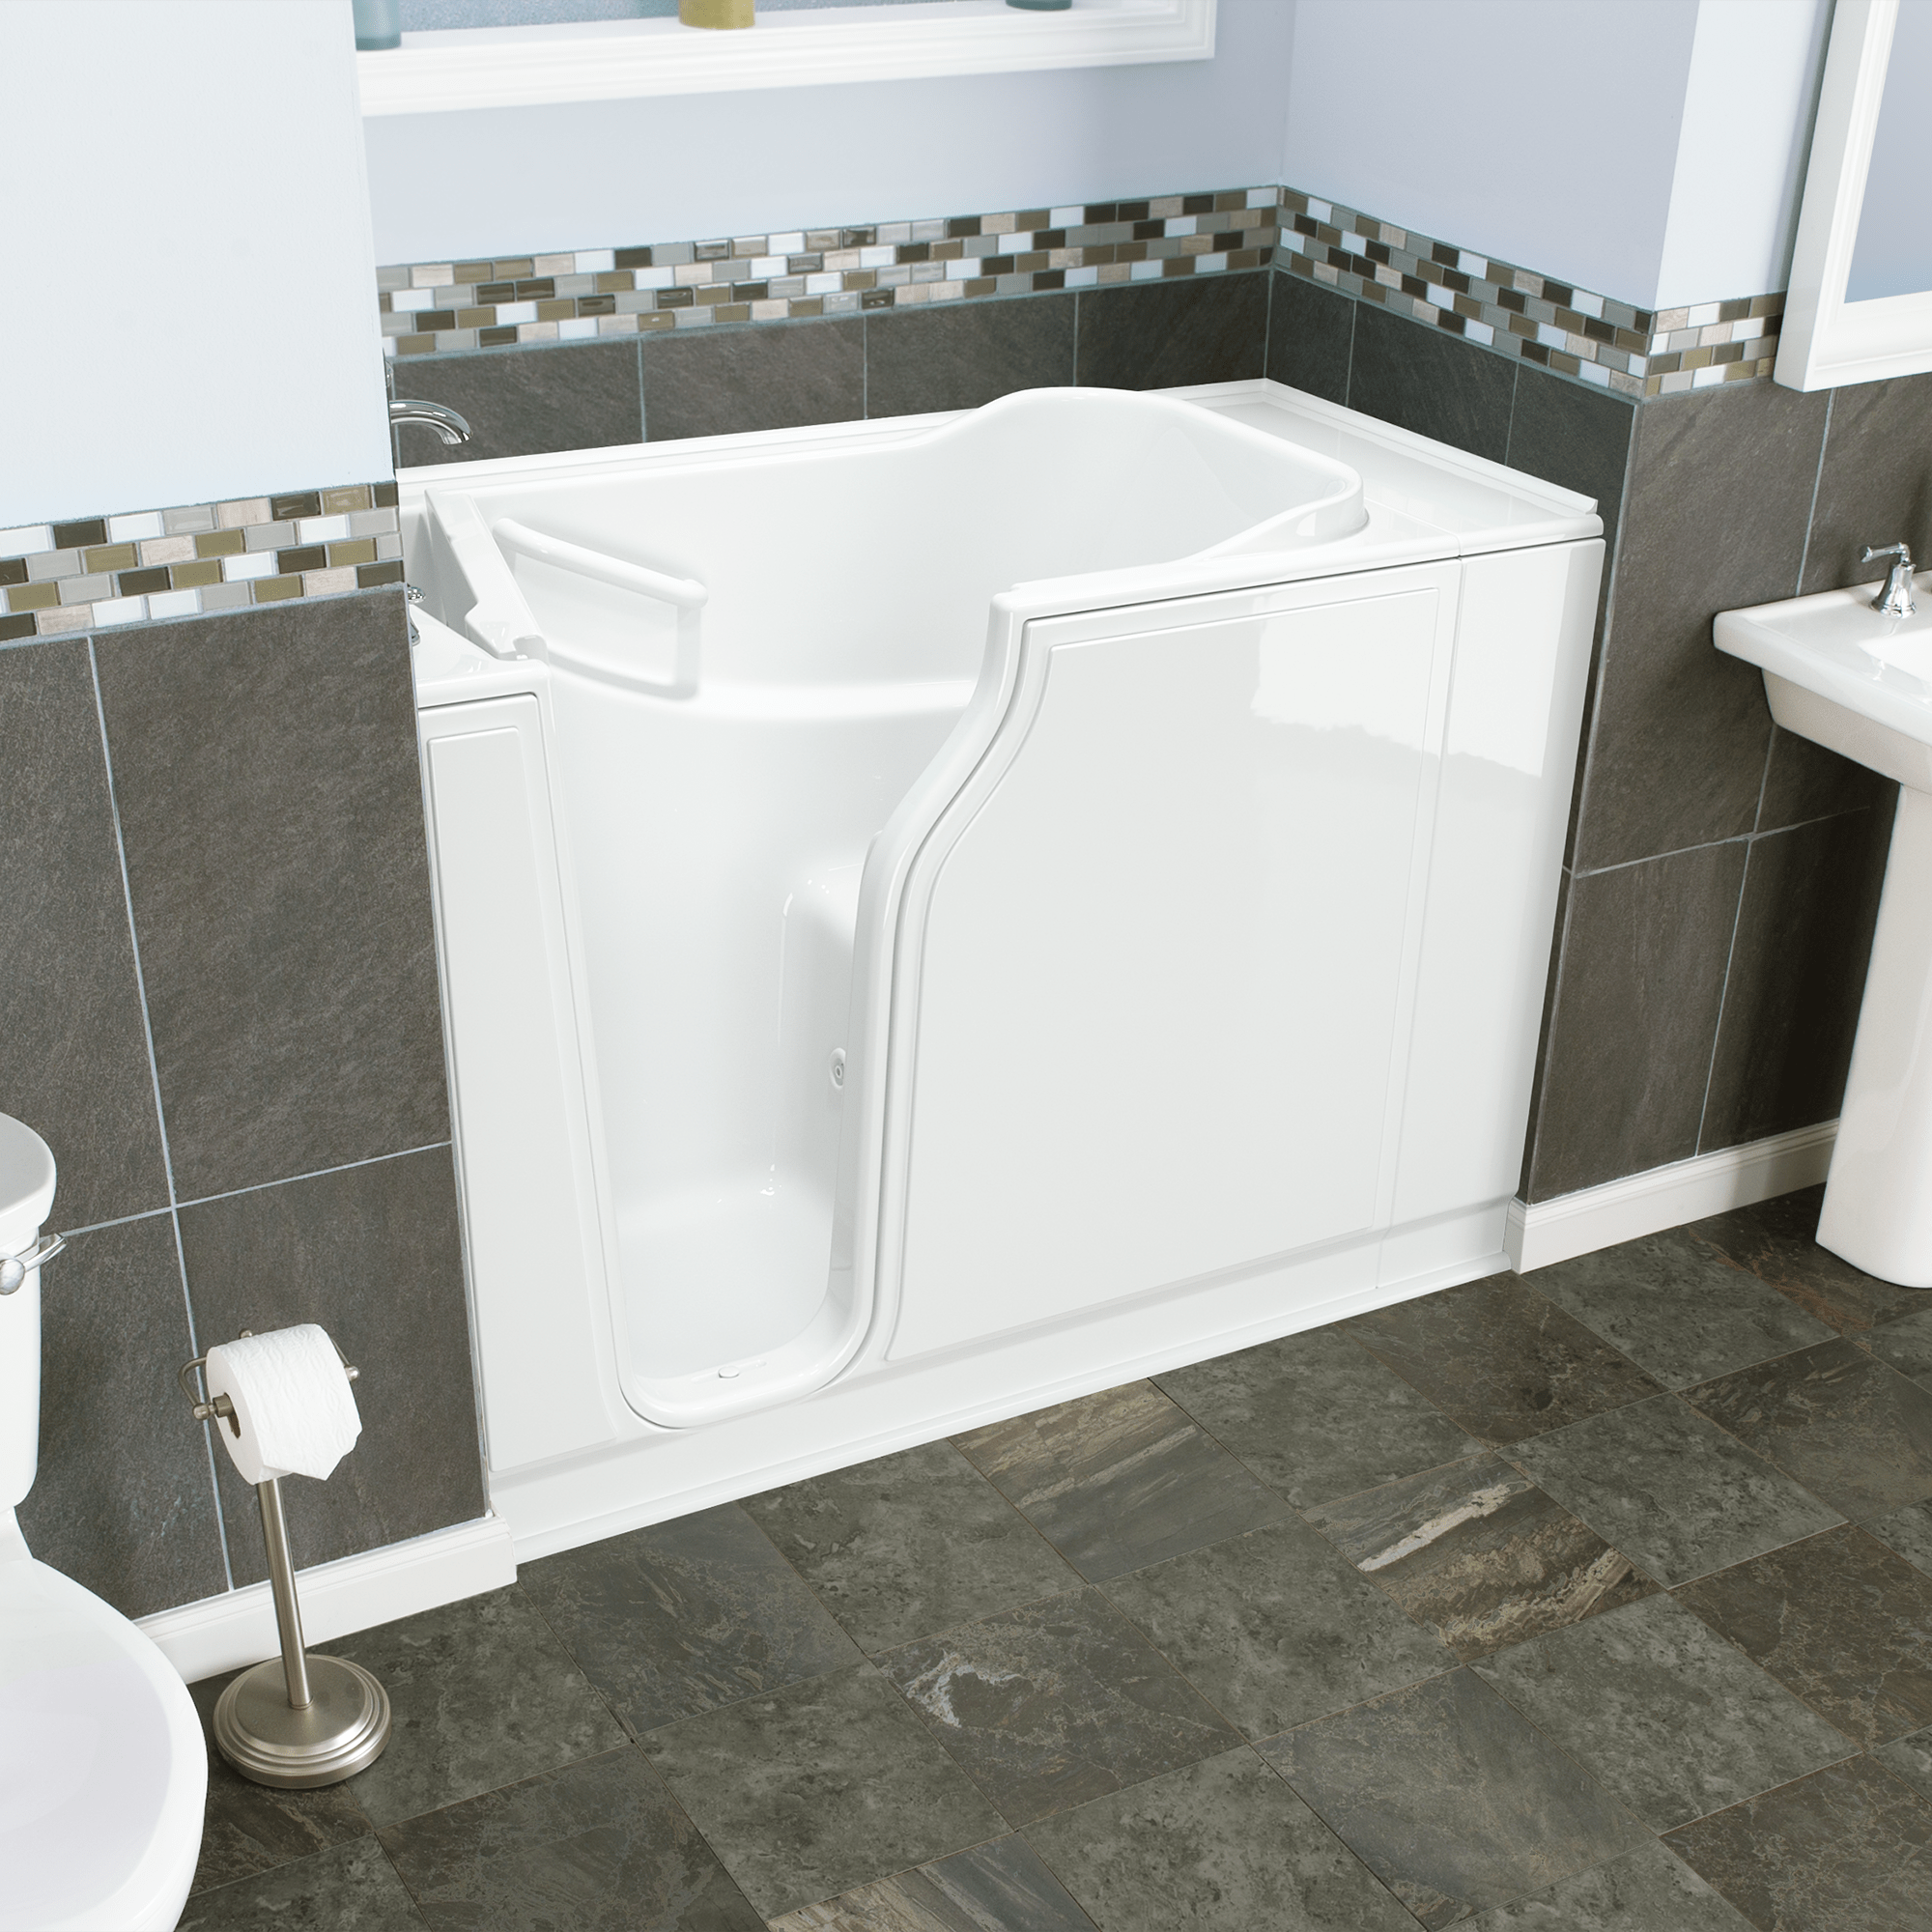 Gelcoat Entry Series 52 x 30 Inch Walk In Tub With Whirlpool System - Left Hand Drain With Faucet WIB WHITE